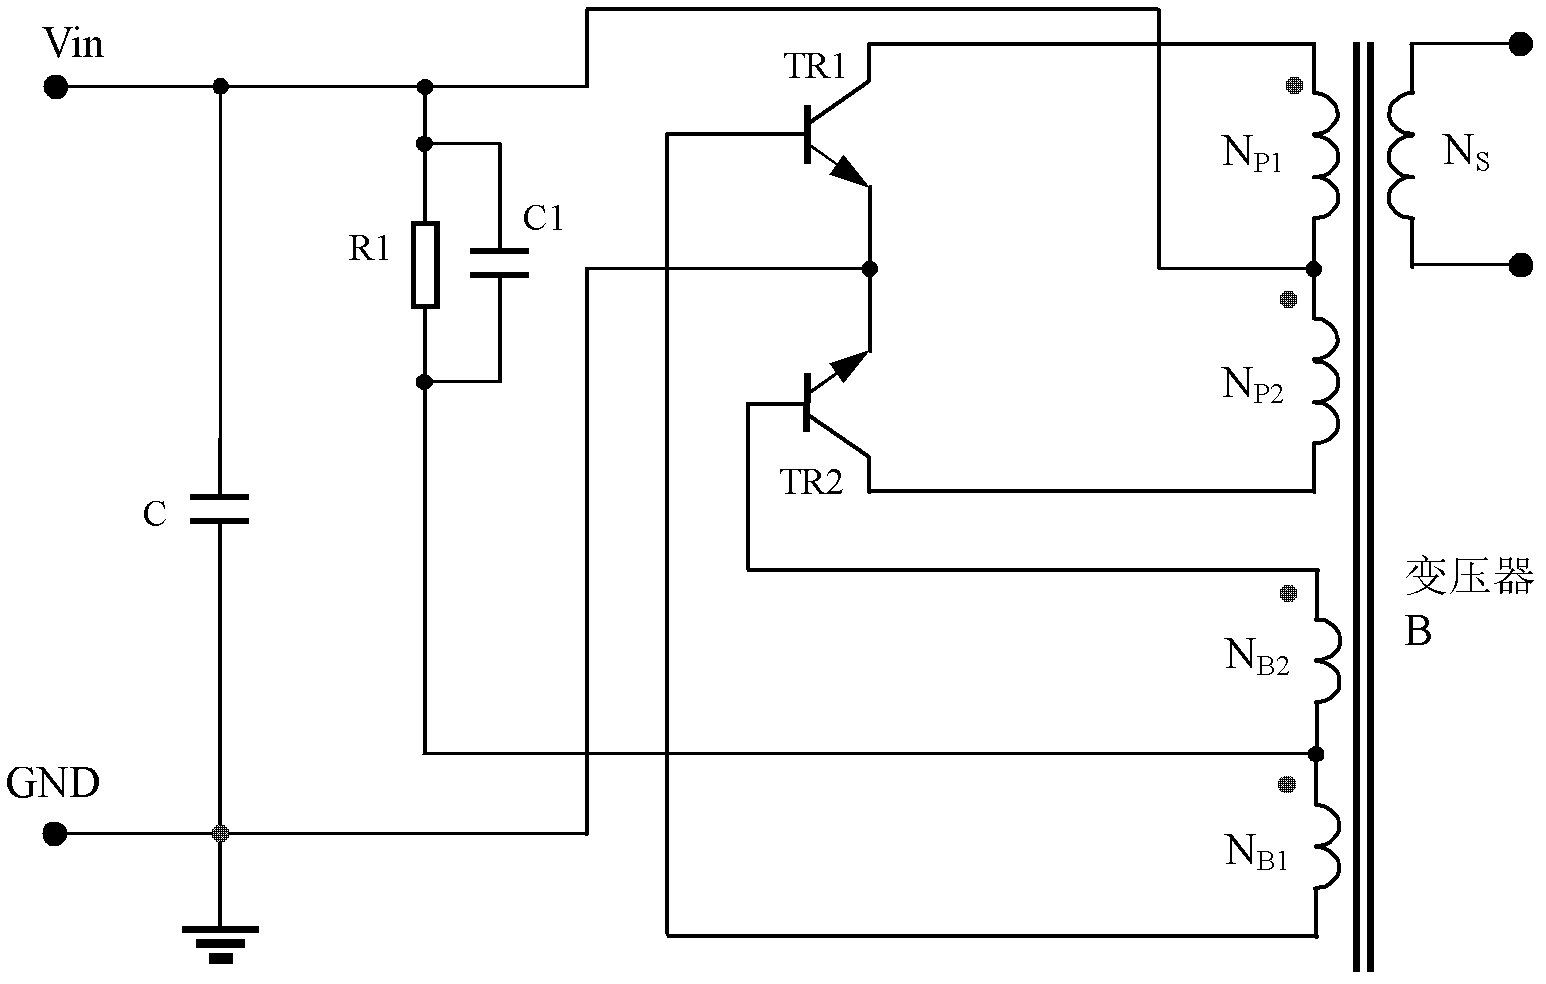 Self-excited push-pull type converter